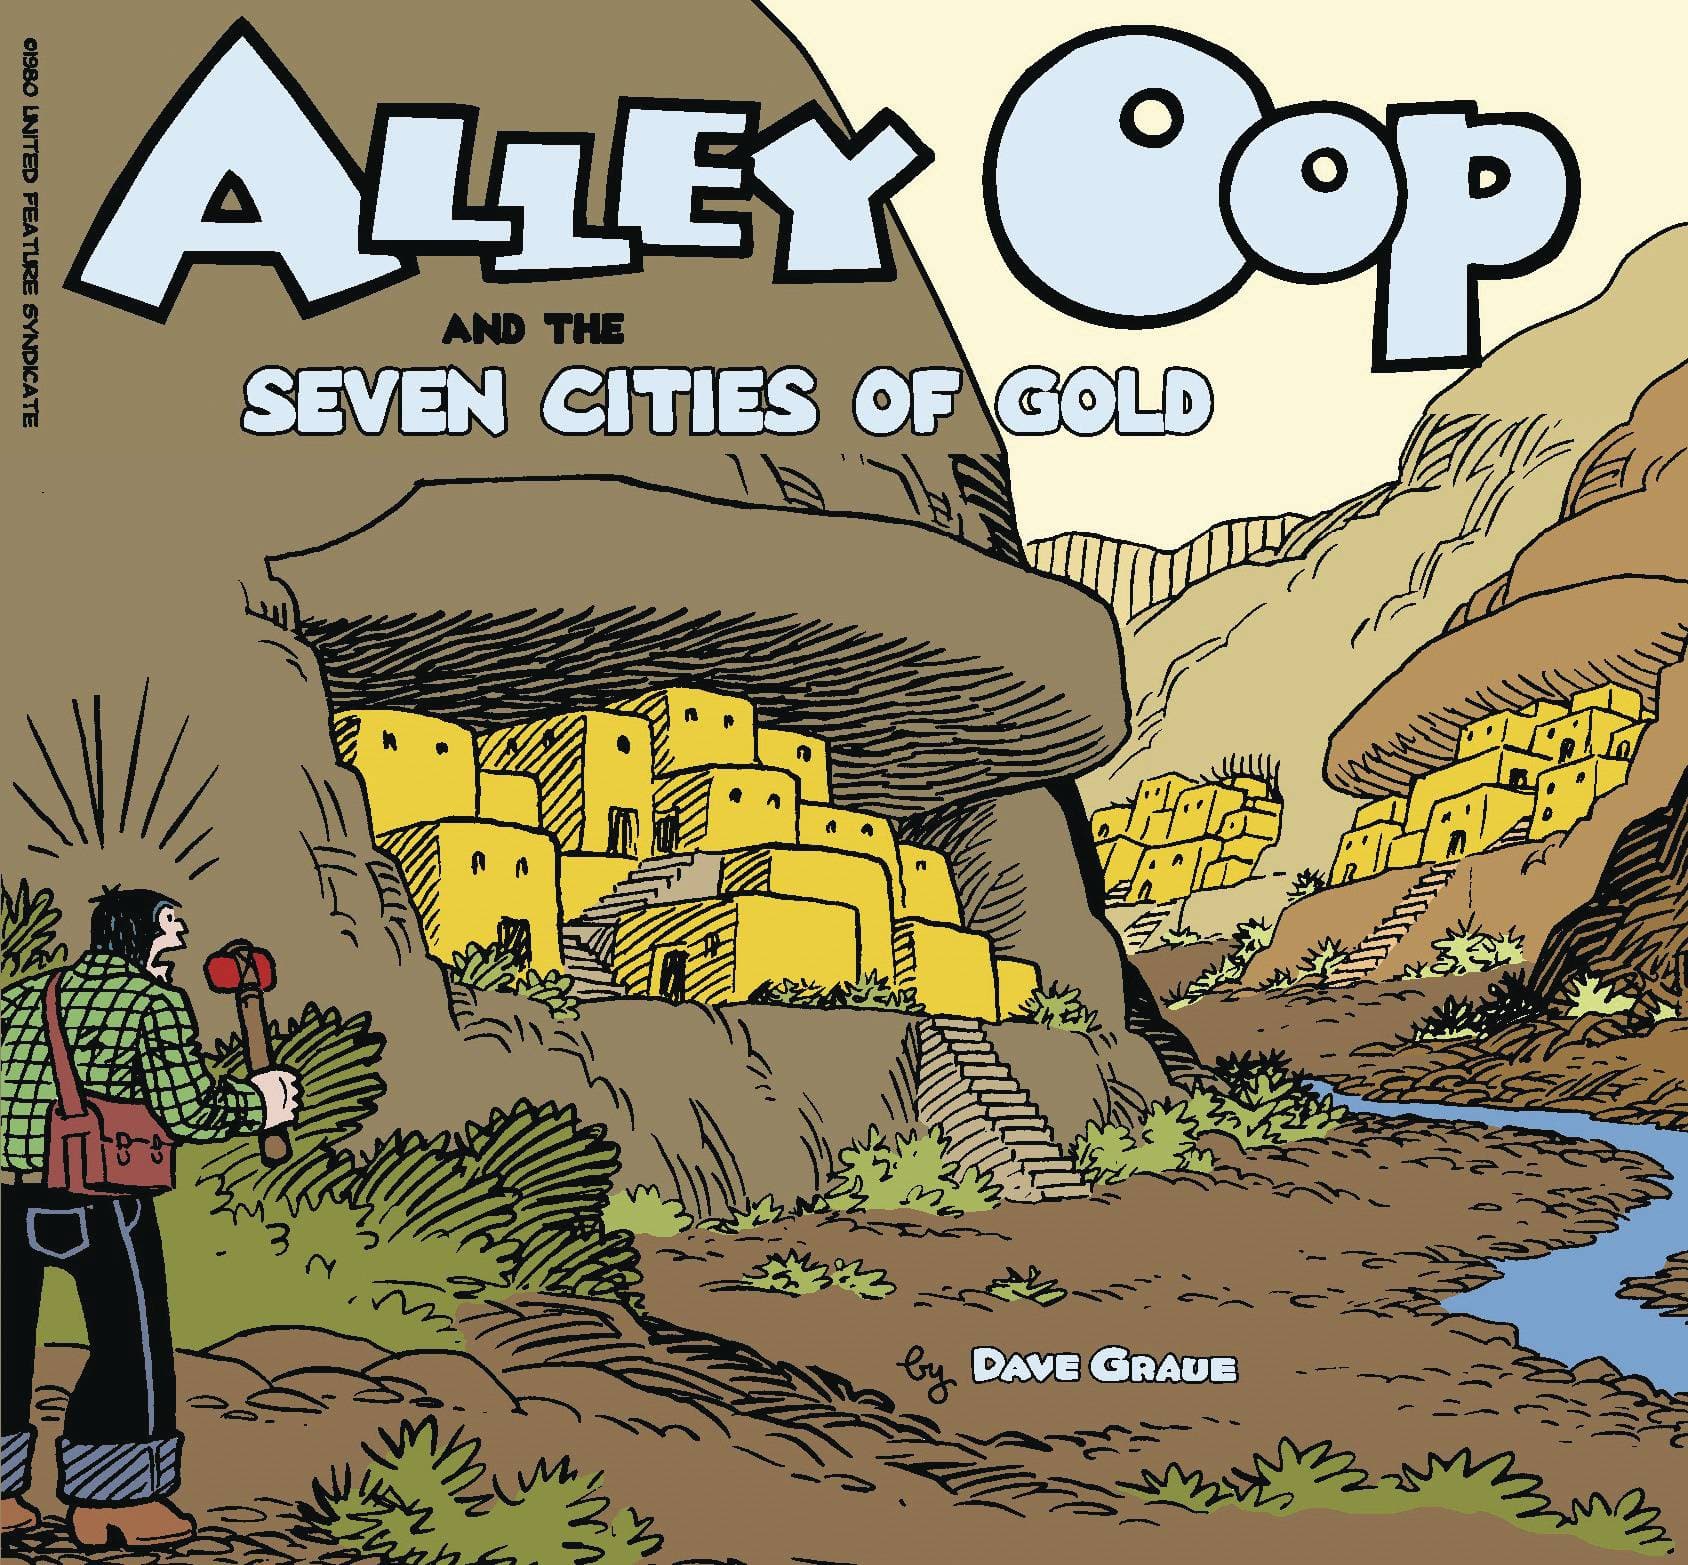 ALLEY OOP AND SEVEN CITIES OF GOLD - Third Eye